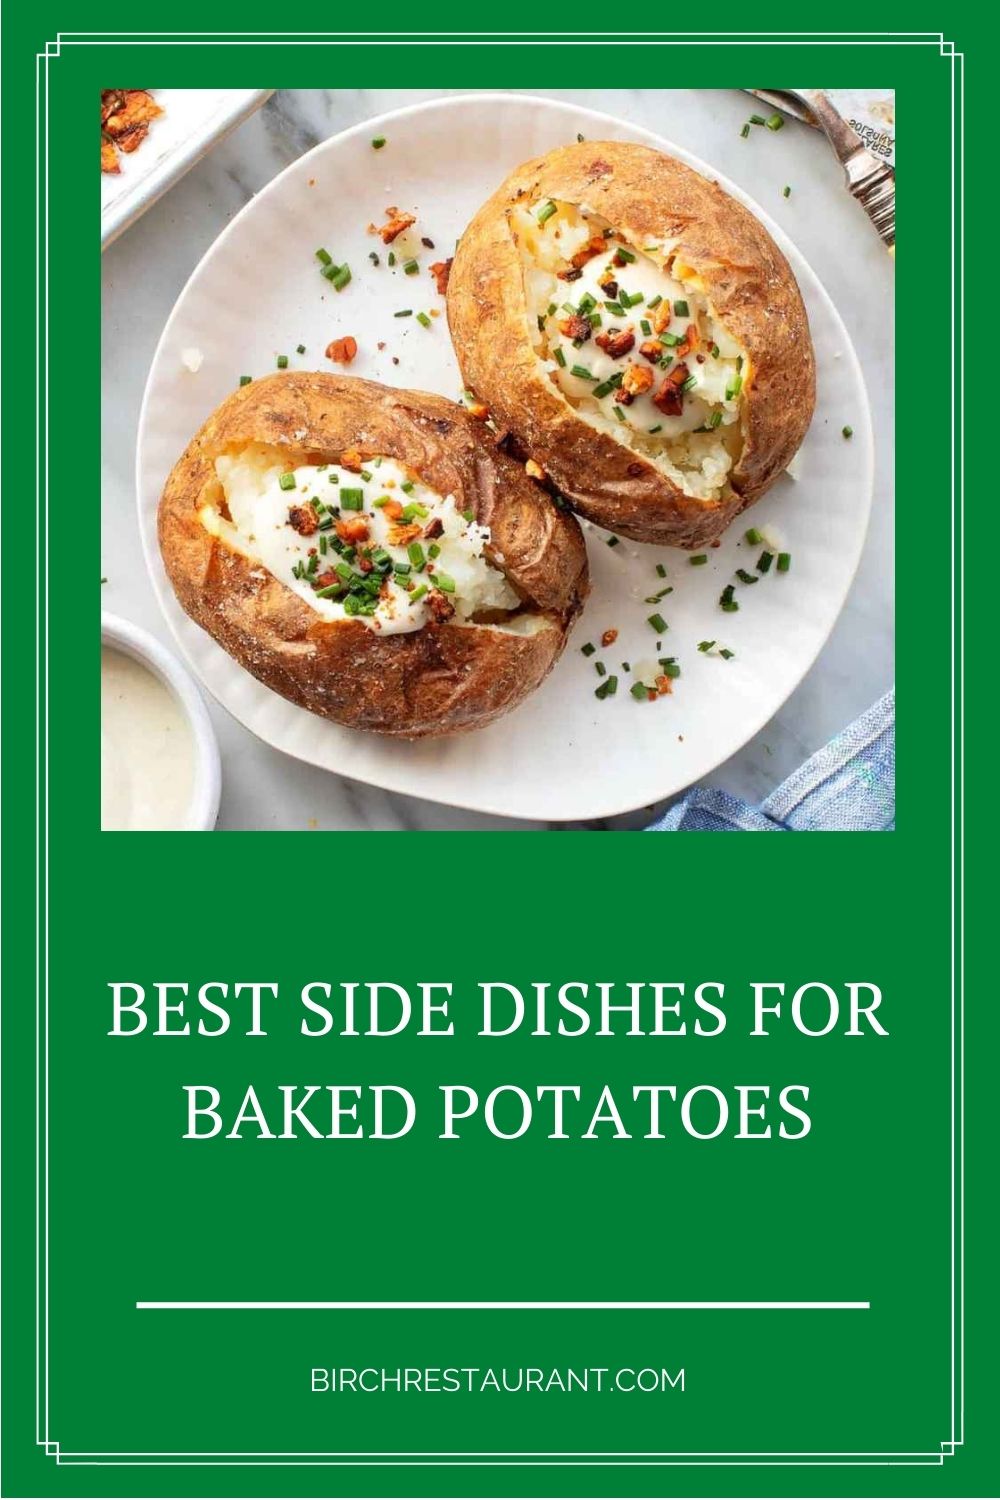 Best Side Dishes for Baked Potatoes